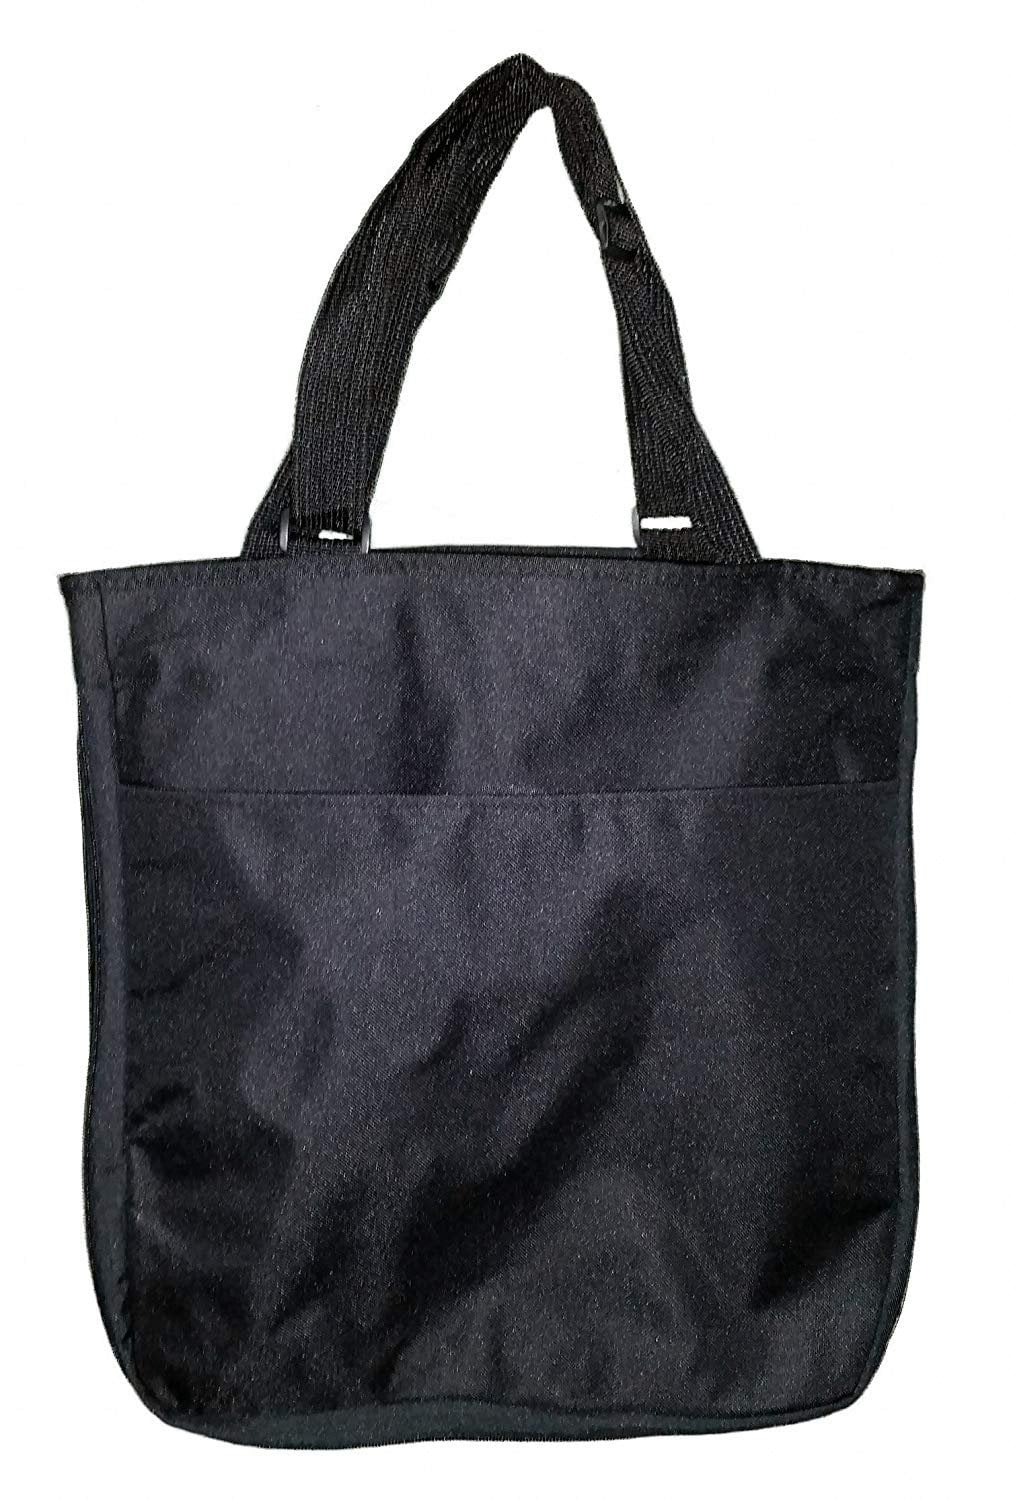 Black Zippered Tote Bag with Expandable Zipper and Outside Pocket ...